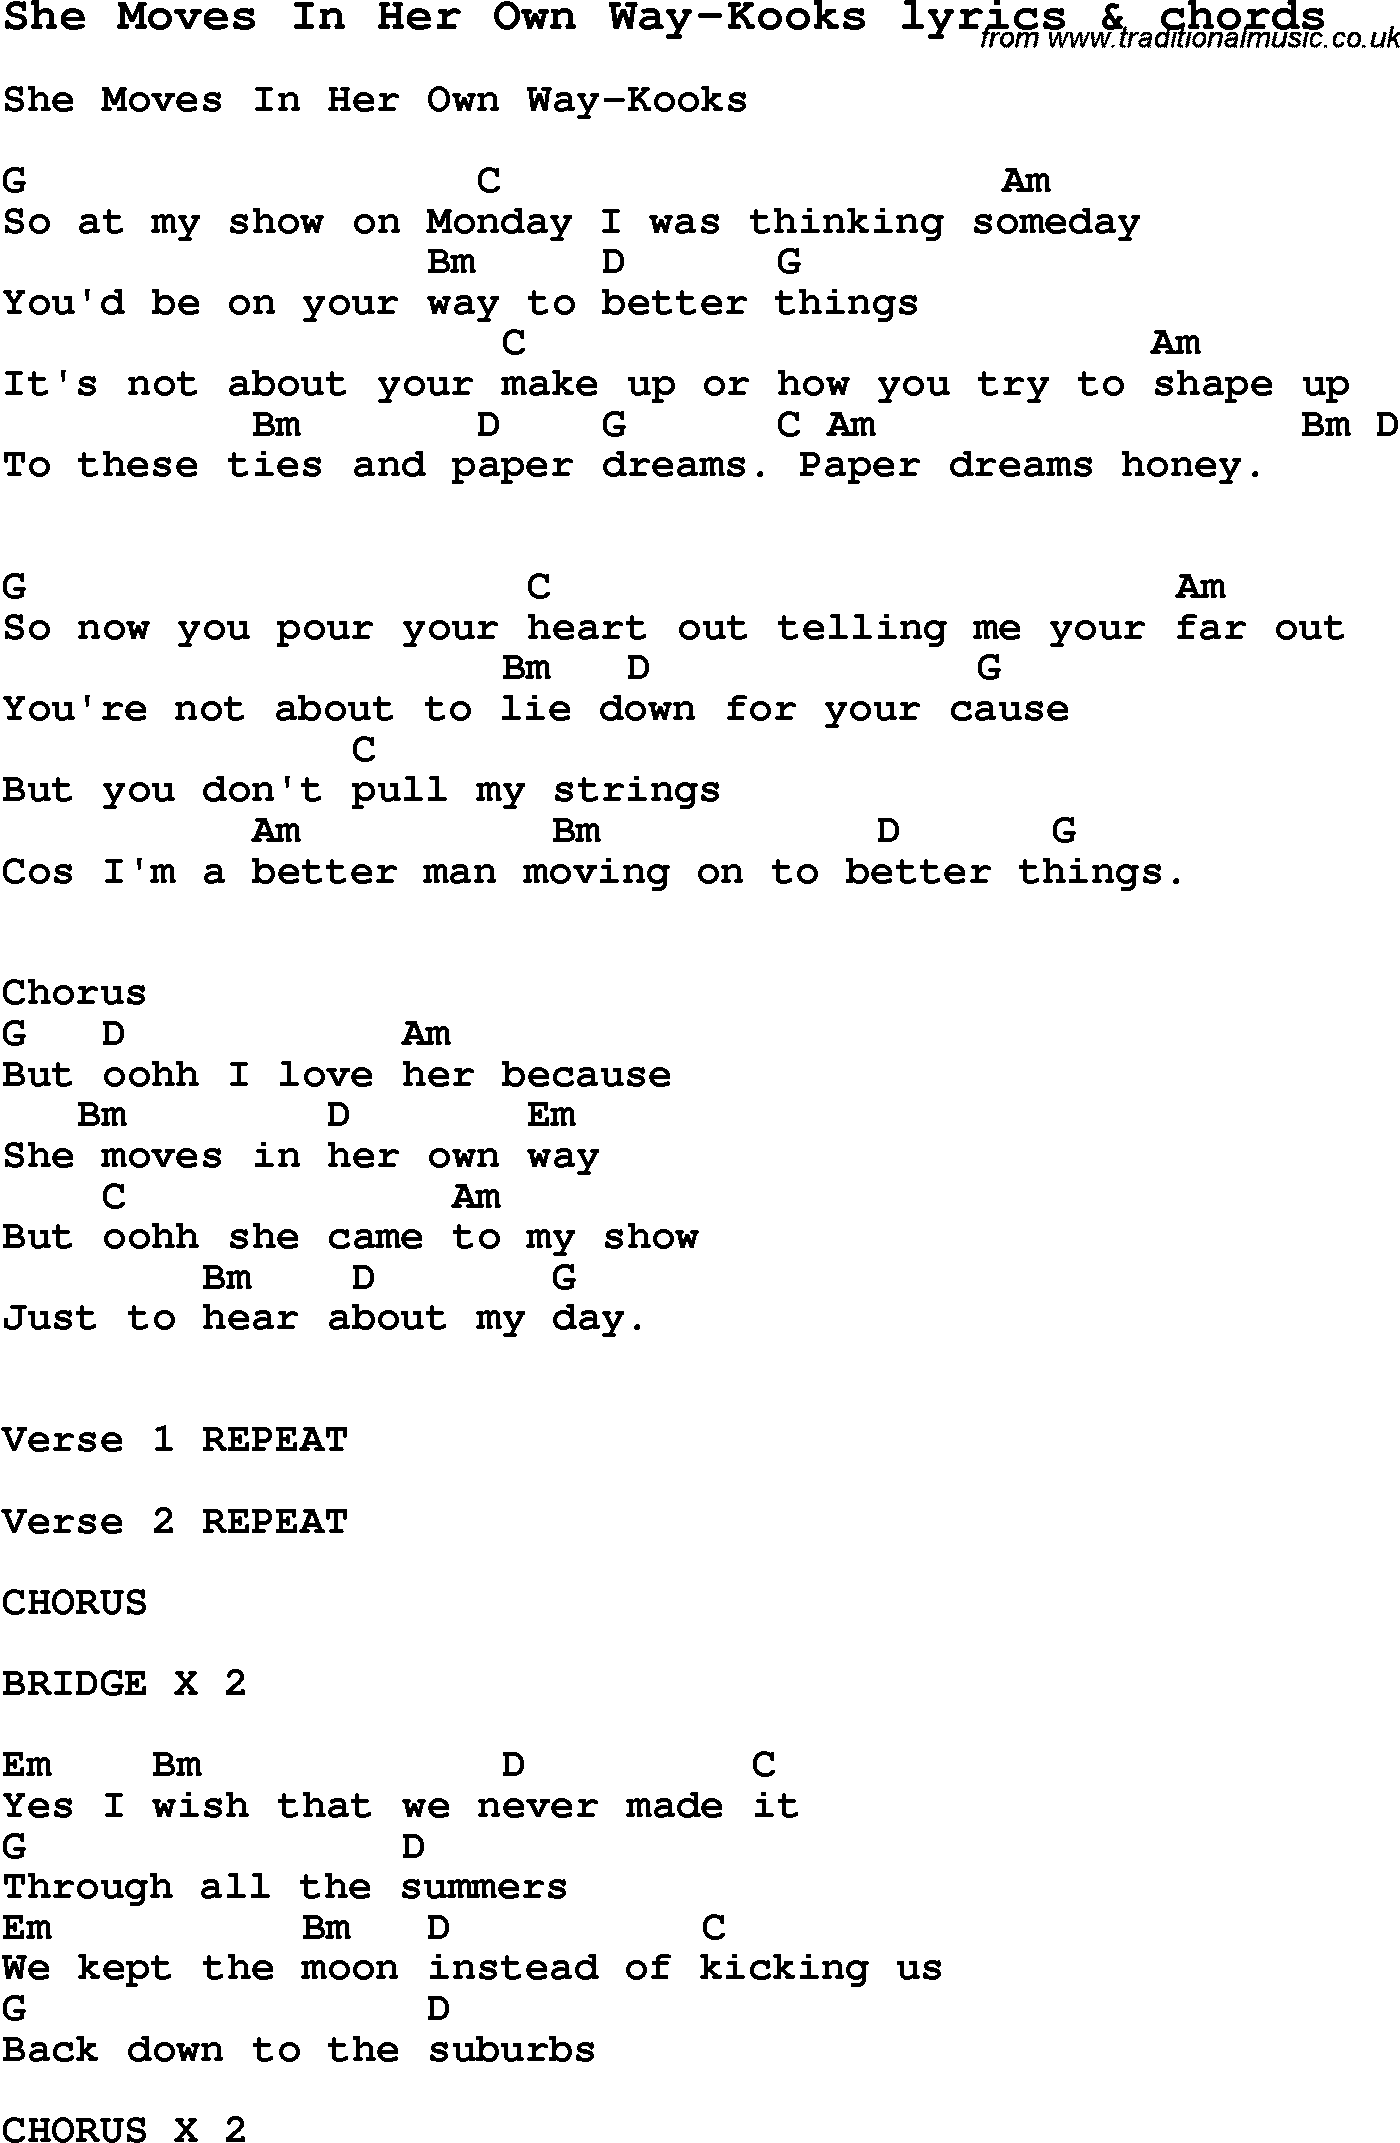 Love Song Lyrics for: She Moves In Her Own Way-Kooks with chords for Ukulele, Guitar Banjo etc.